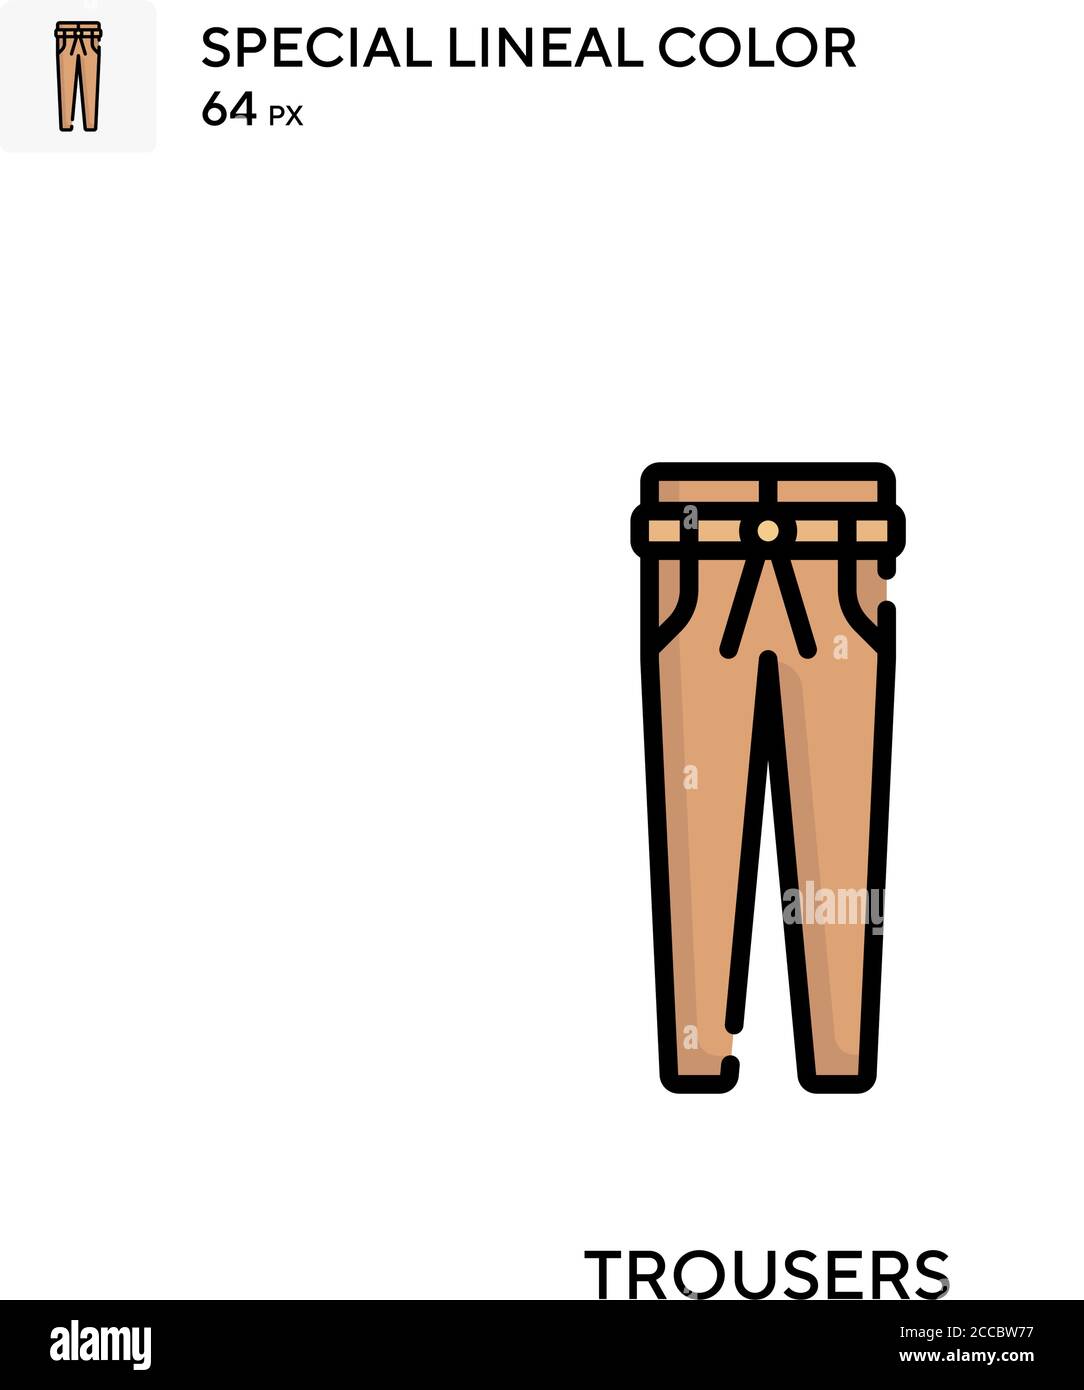 Trousers Special lineal color vector icon. Trousers icons for your